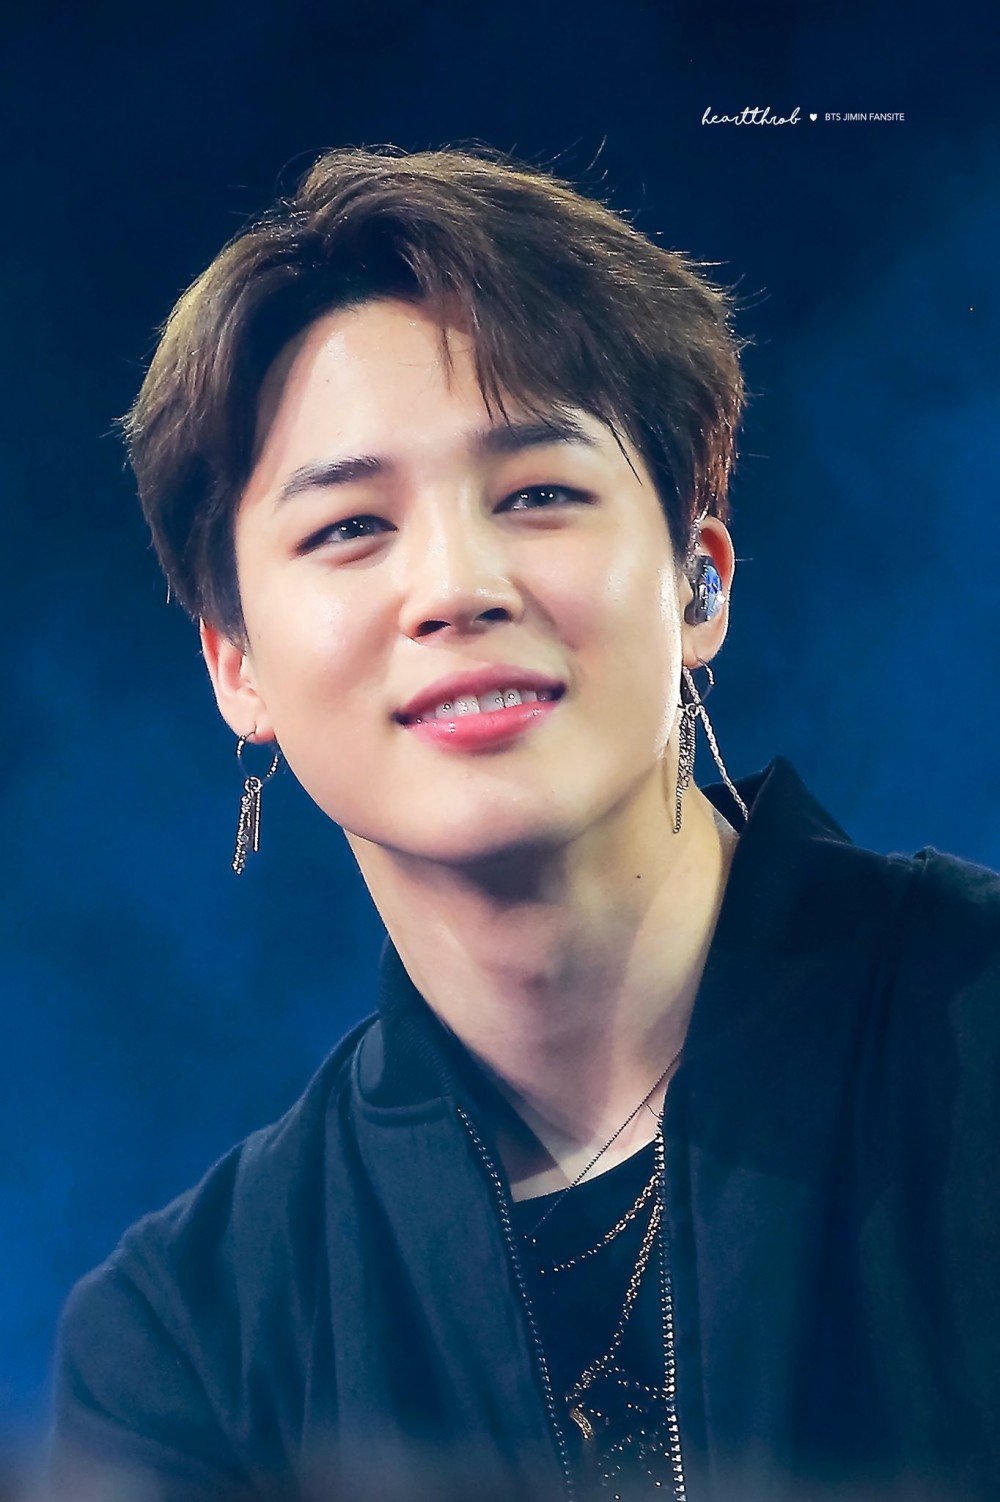 “Stunning Collection of Jimin Images in Full 4K Resolution – Over 999 Pictures”